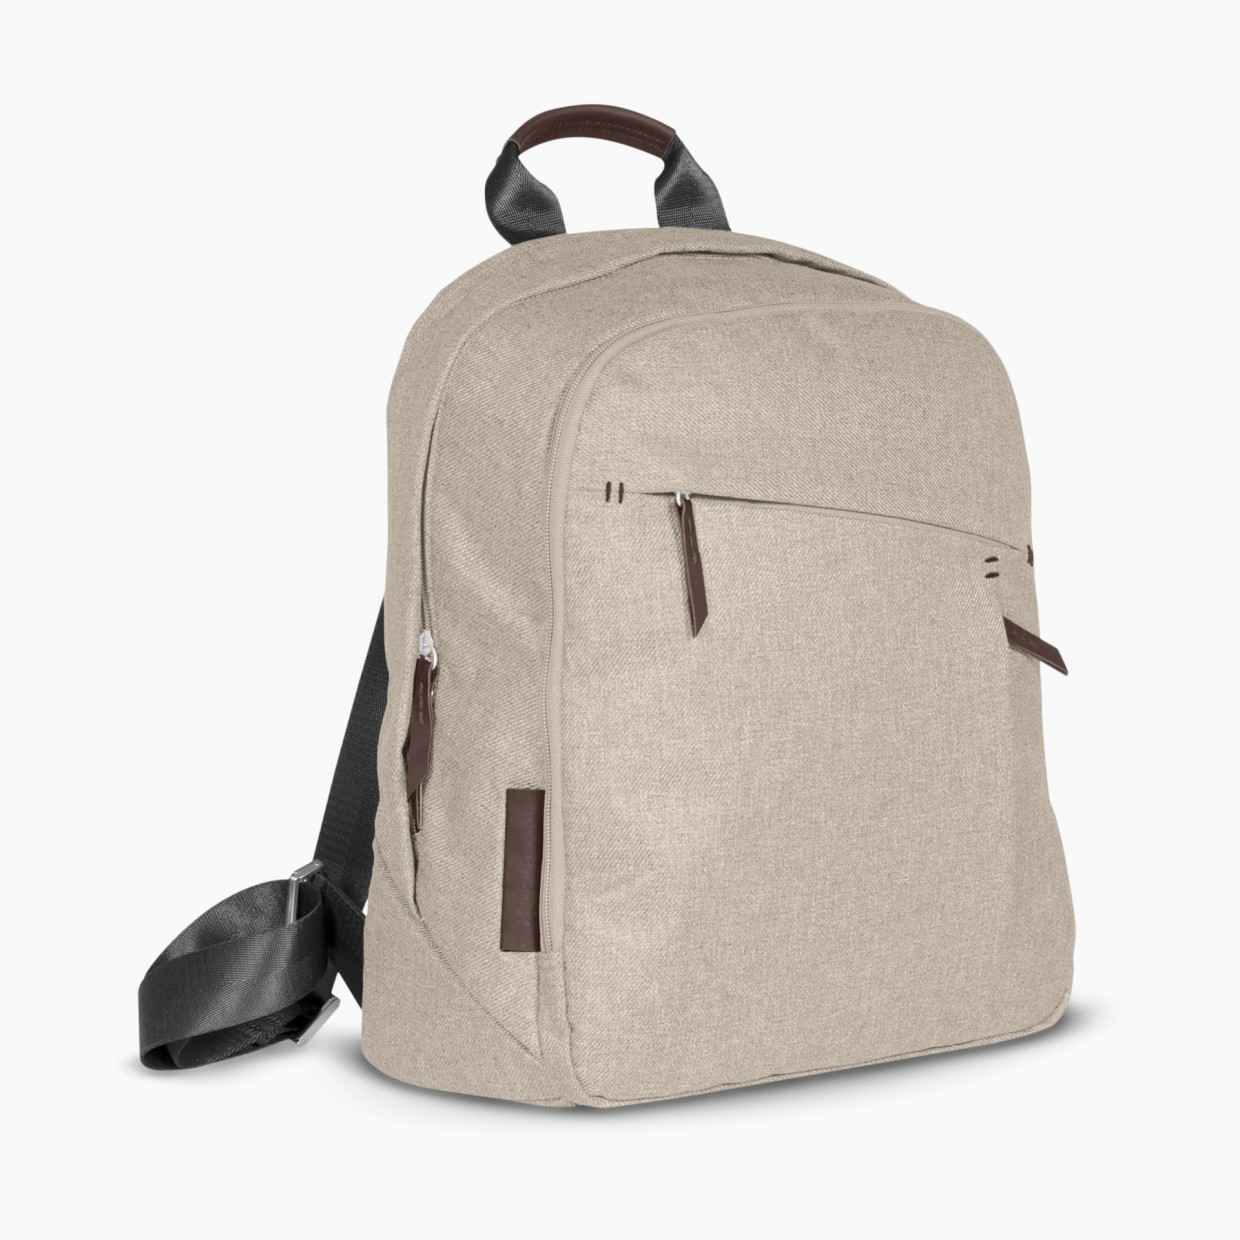 UPPAbaby Changing Backpack - Declan.